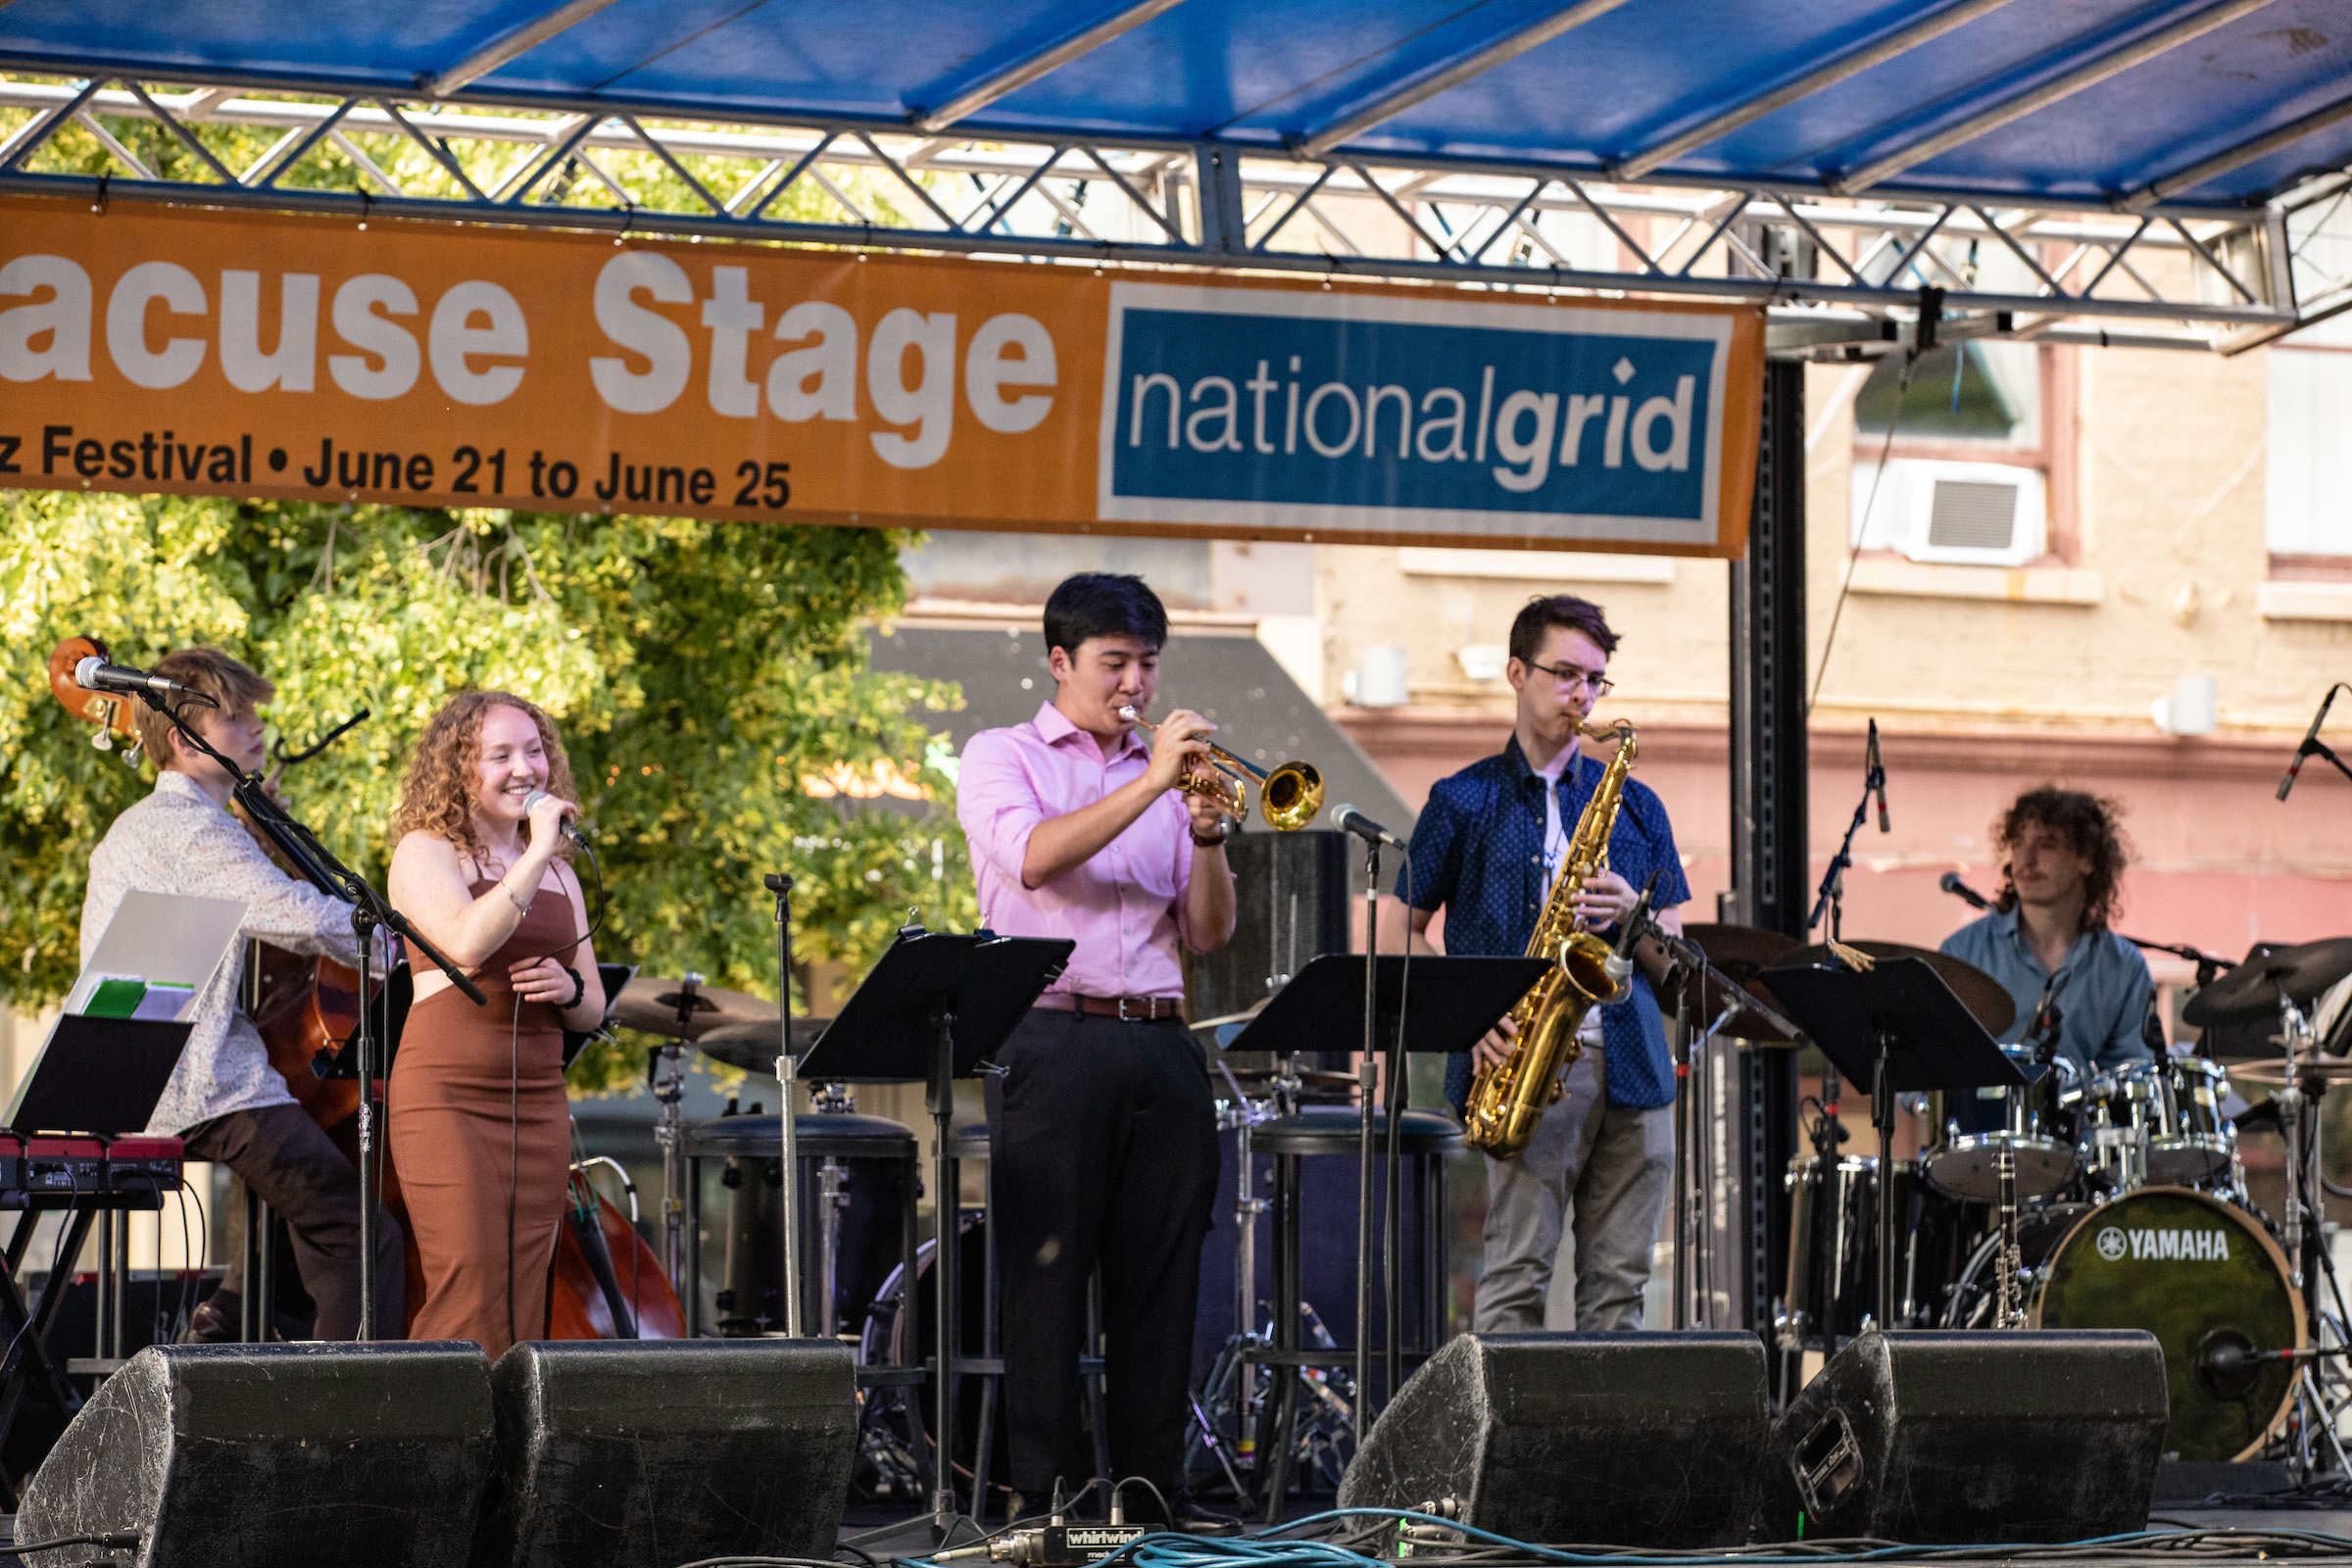 Five individuals on stage performing during Jazz Fest.